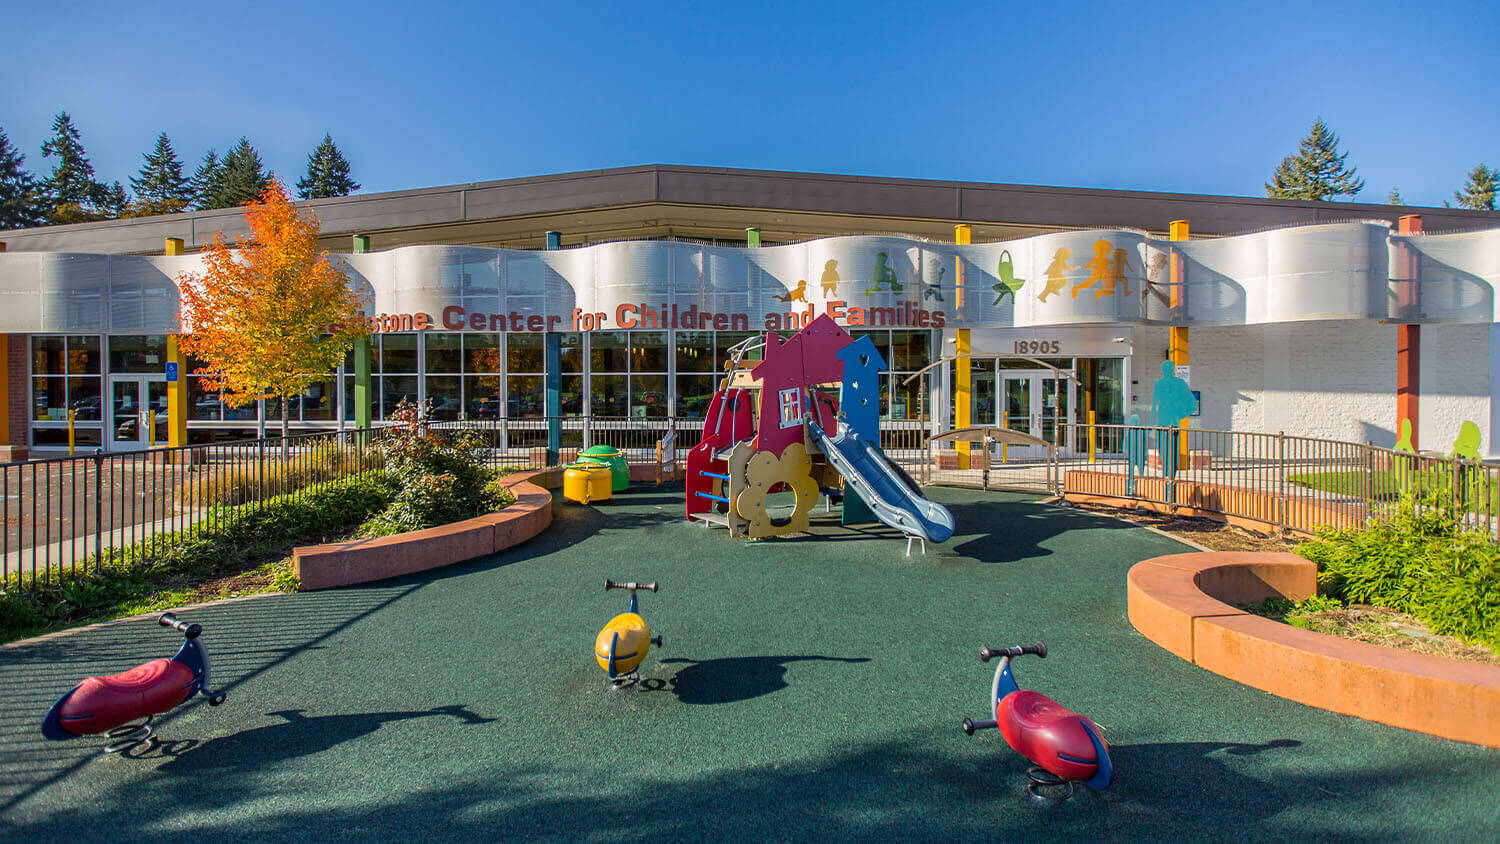 GLADSTONE CENTER FOR CHILDREN AND FAMILIES